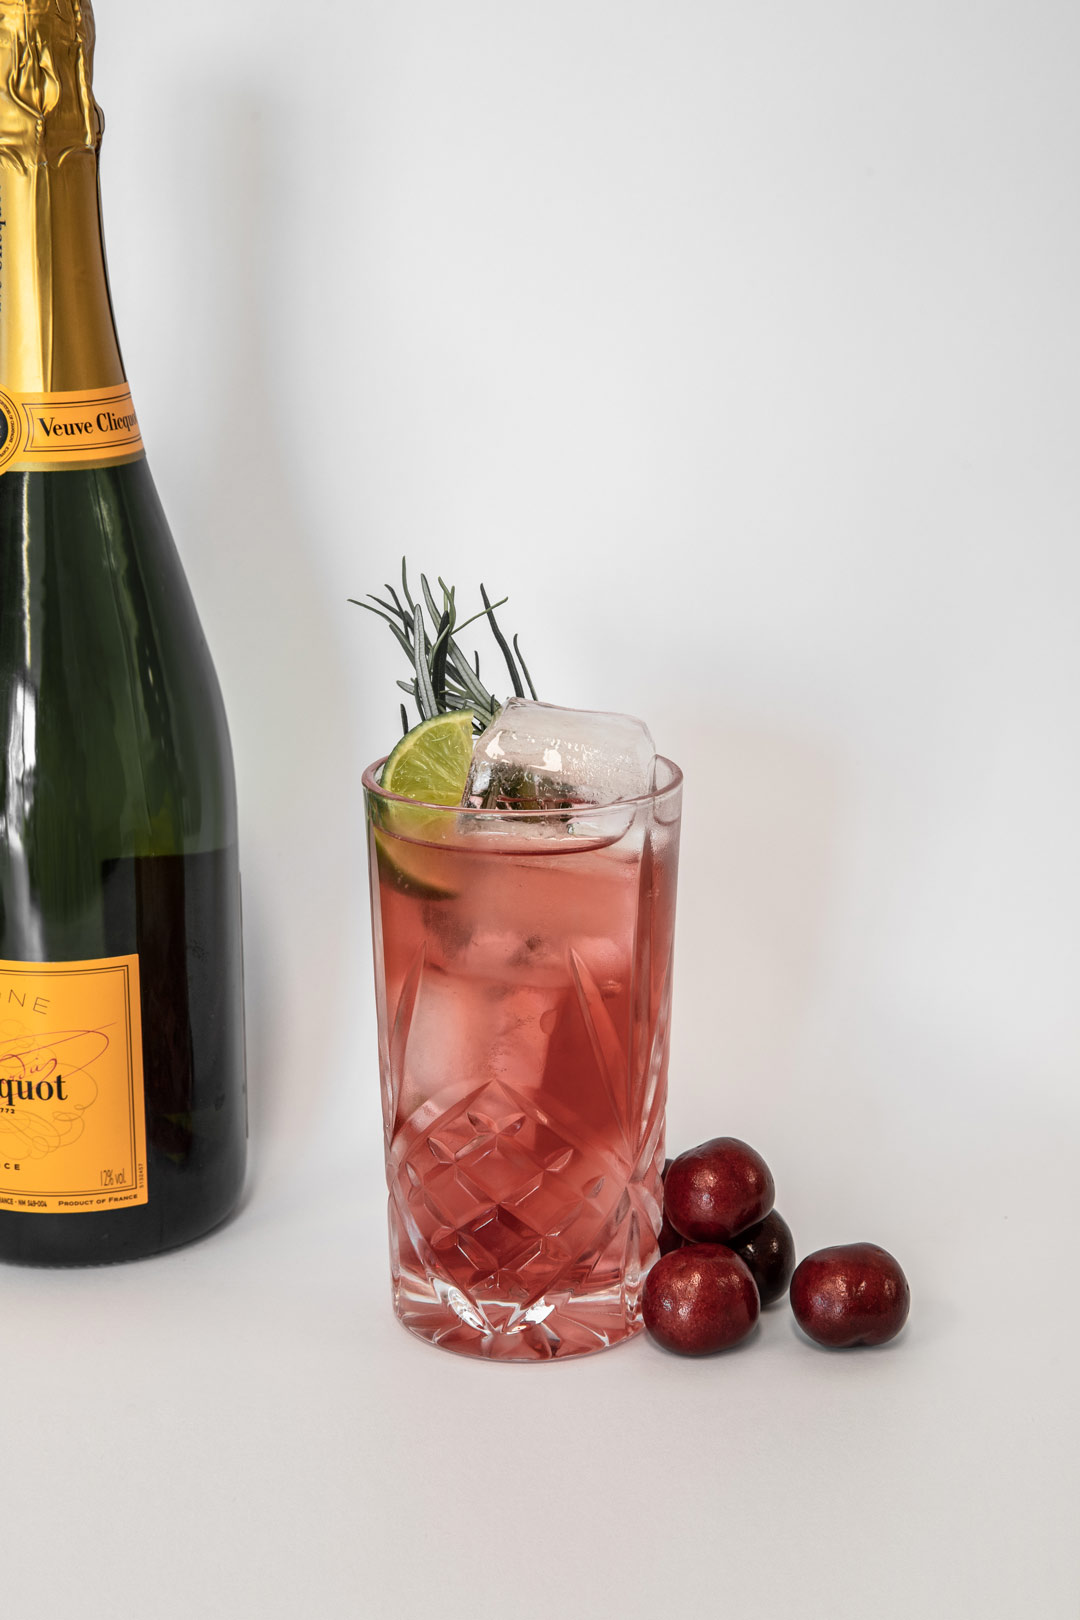 Easy Christmas gin fizz cocktails a tom collins style drink with cranberry and champagne or prosecco